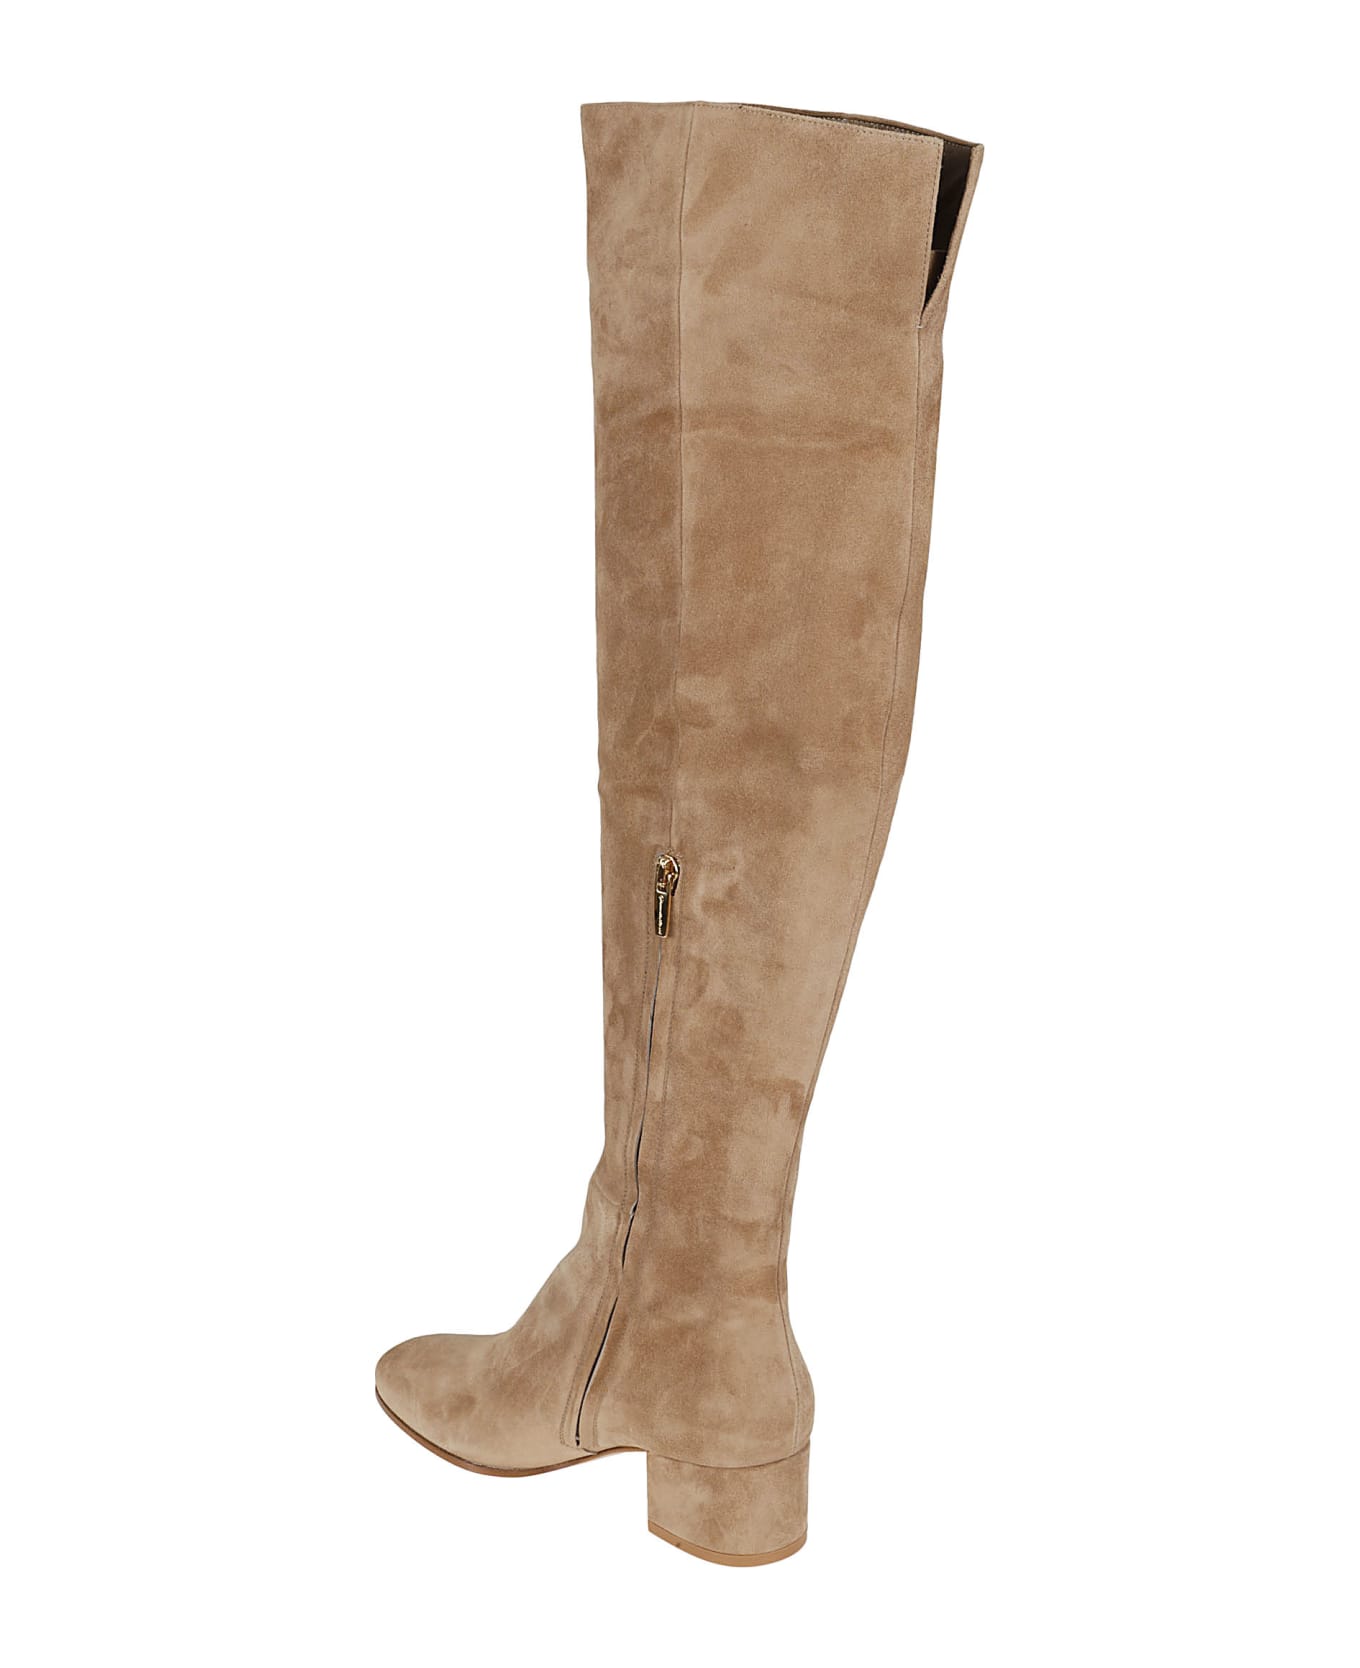 Gianvito Rossi Rolling Mid Camel Over-the-knee Boots - Camel